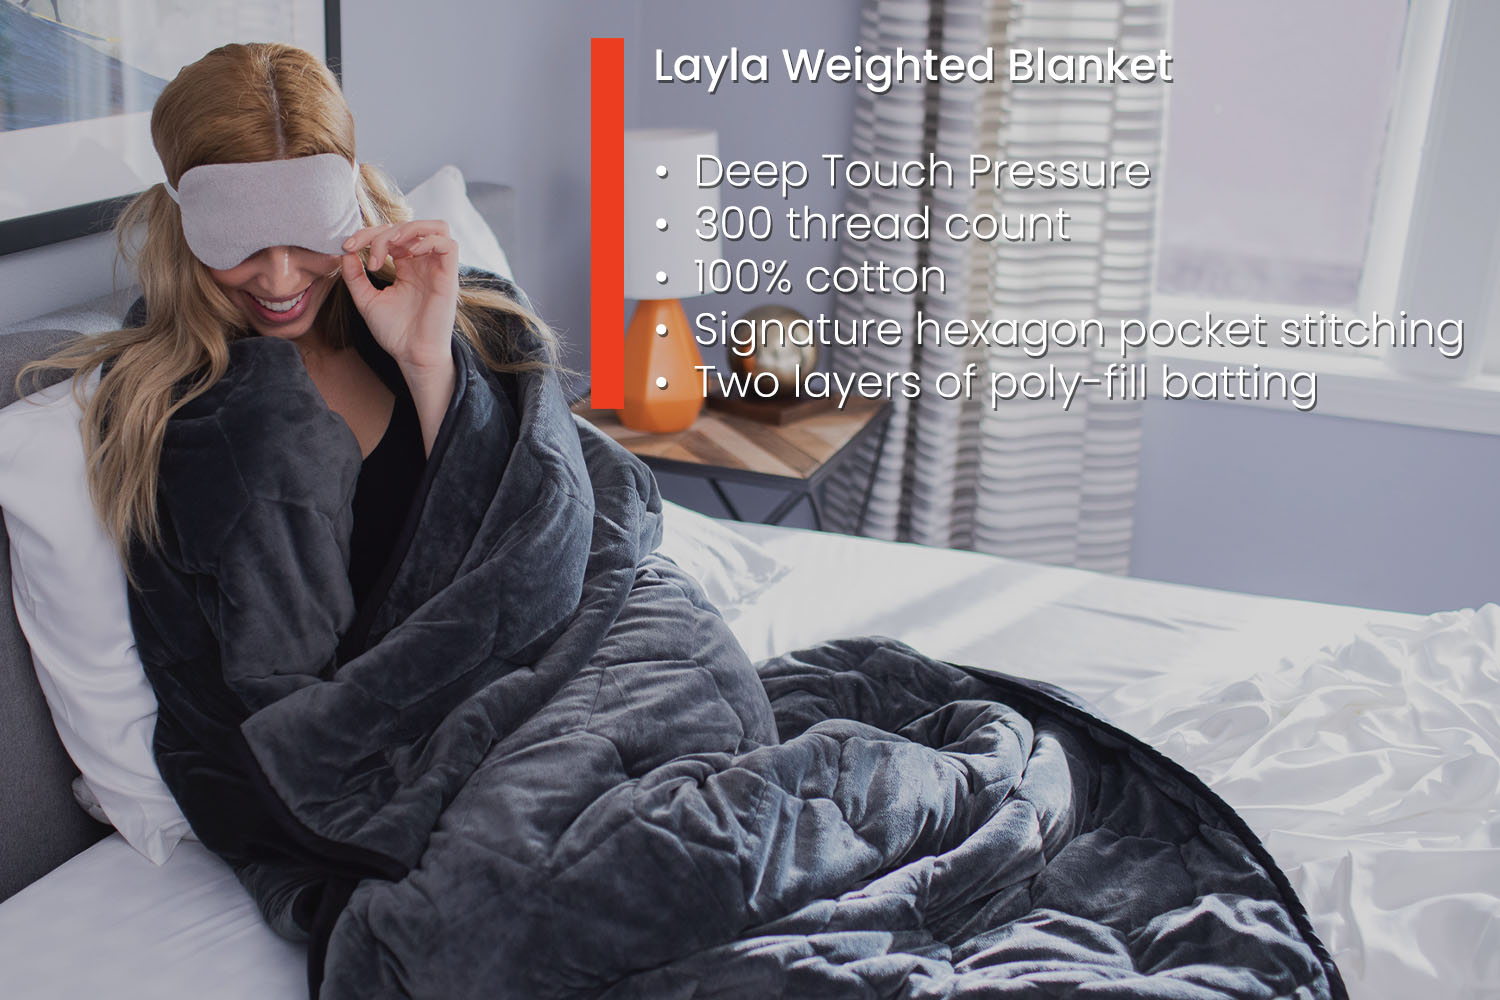 Layla weighted blanket